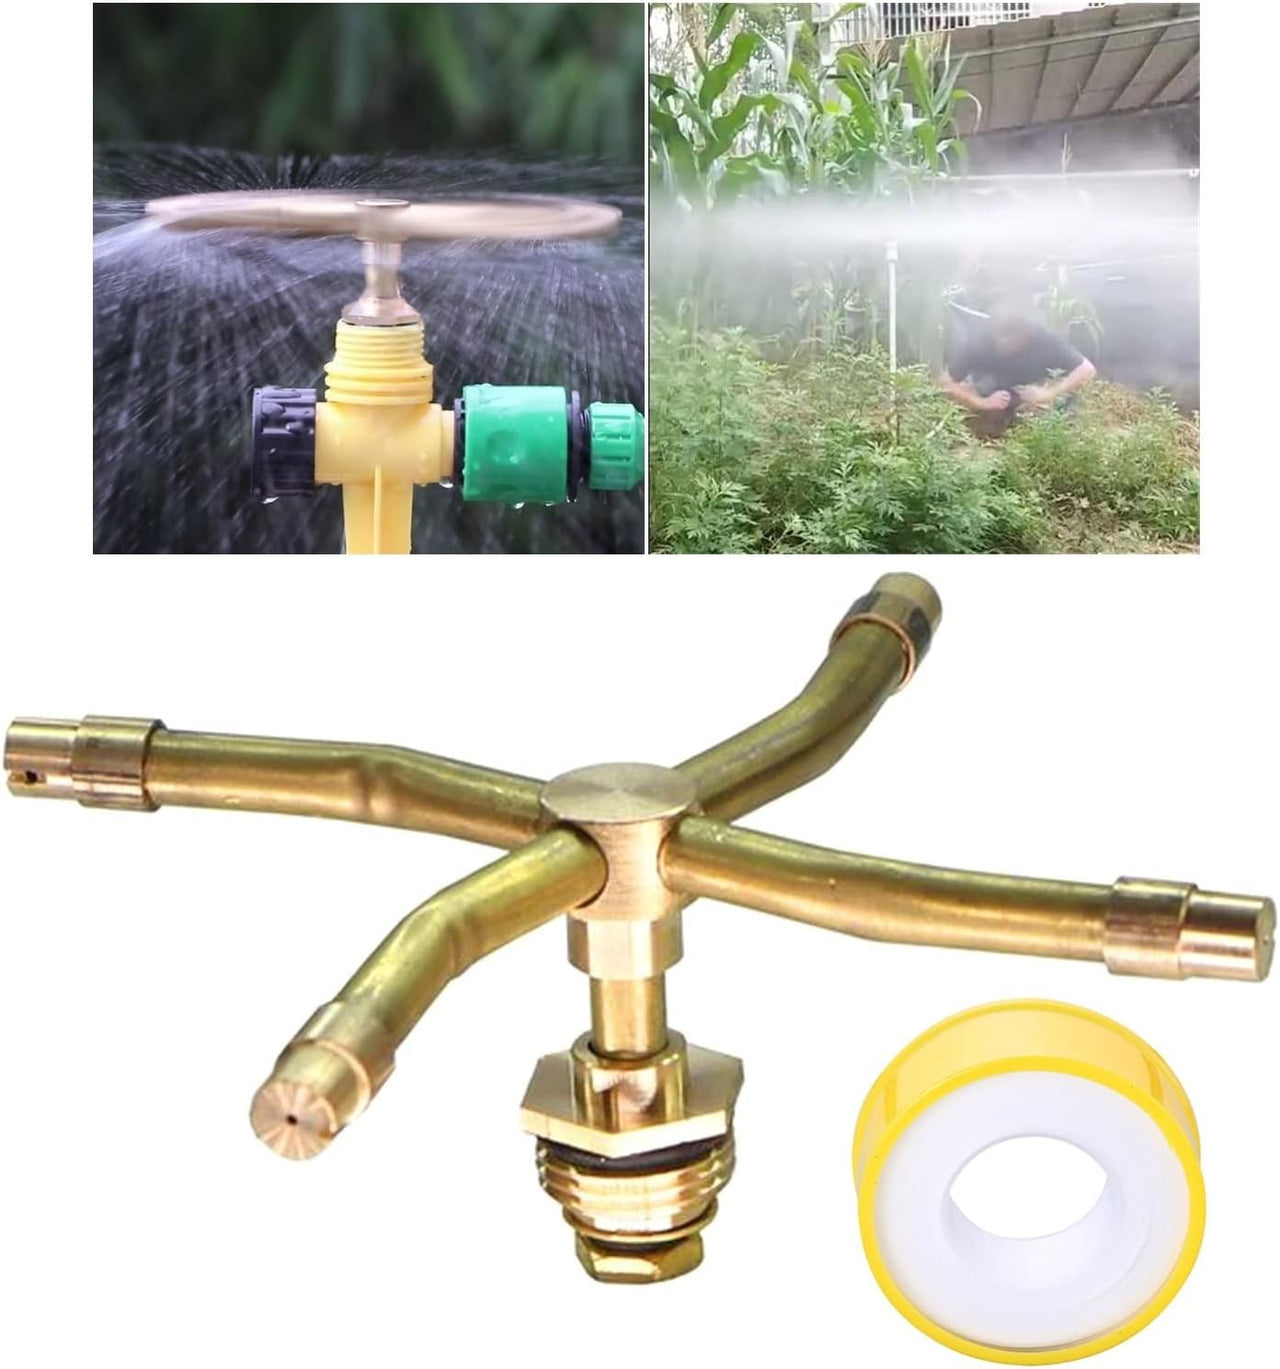 4 Arm Automatic Rotary Sprayer 🔥LAST DAY SPECIAL SALE 66% OFF 🔥